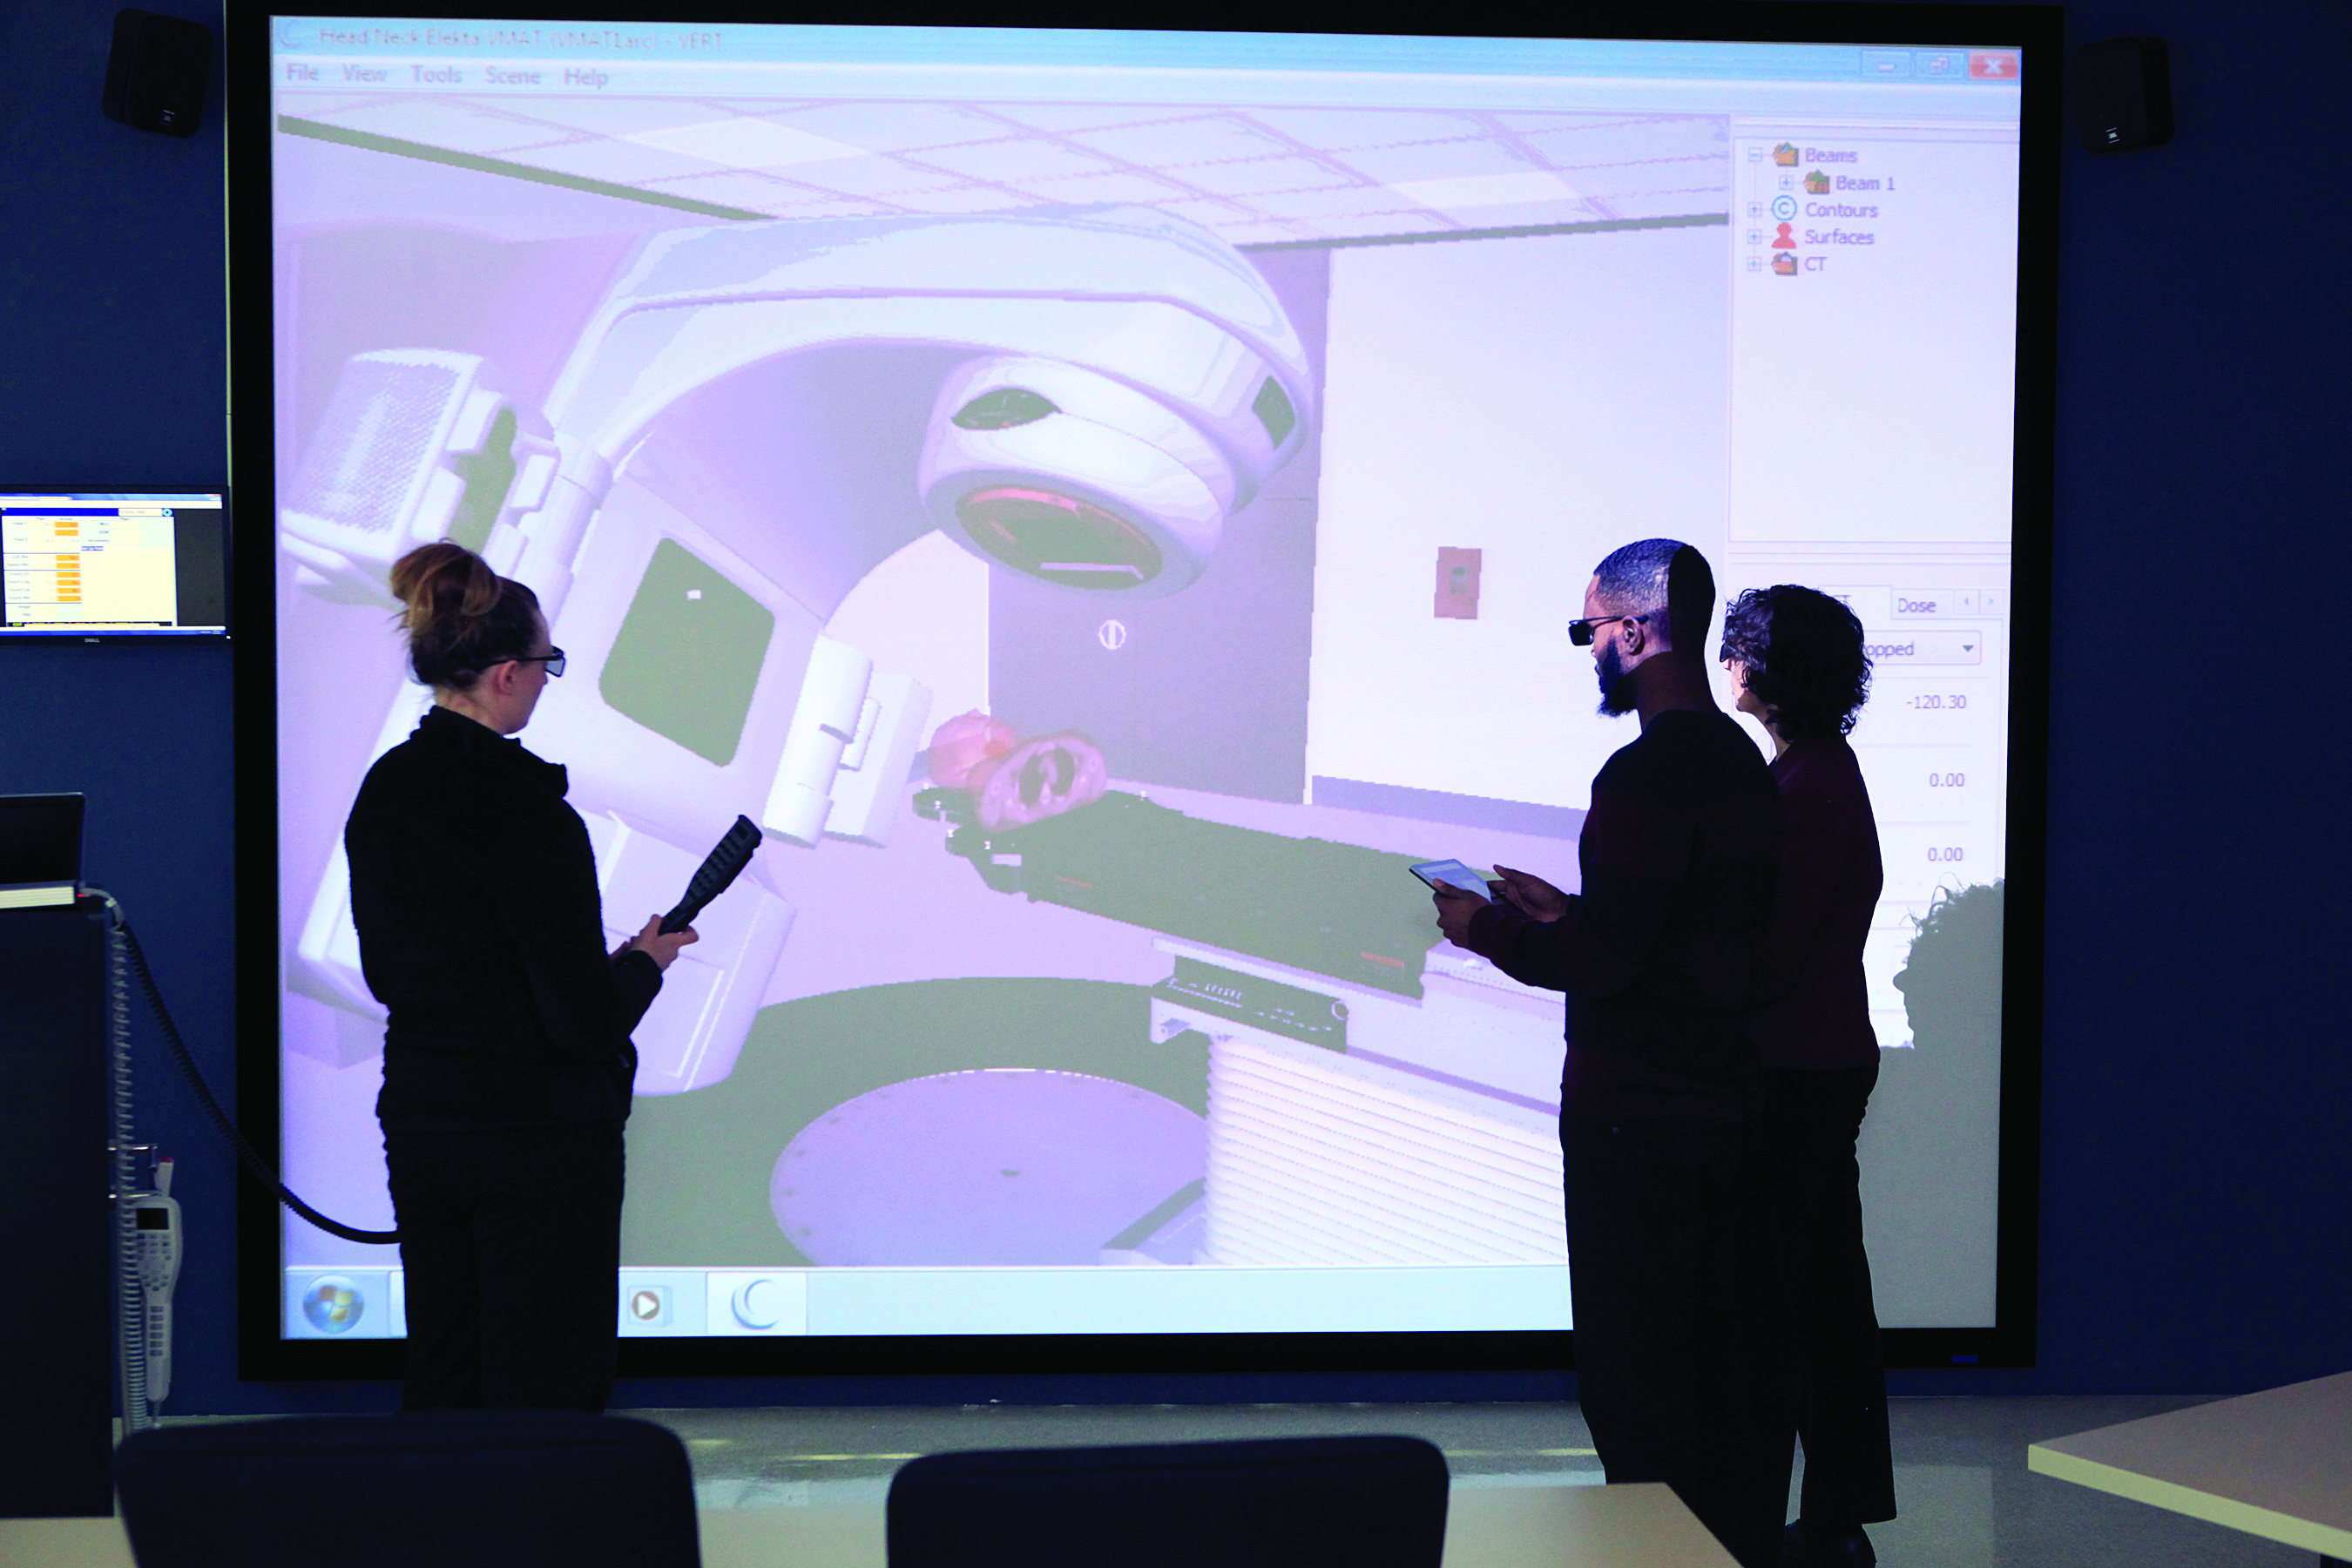 radiation therapy students look at image on screen